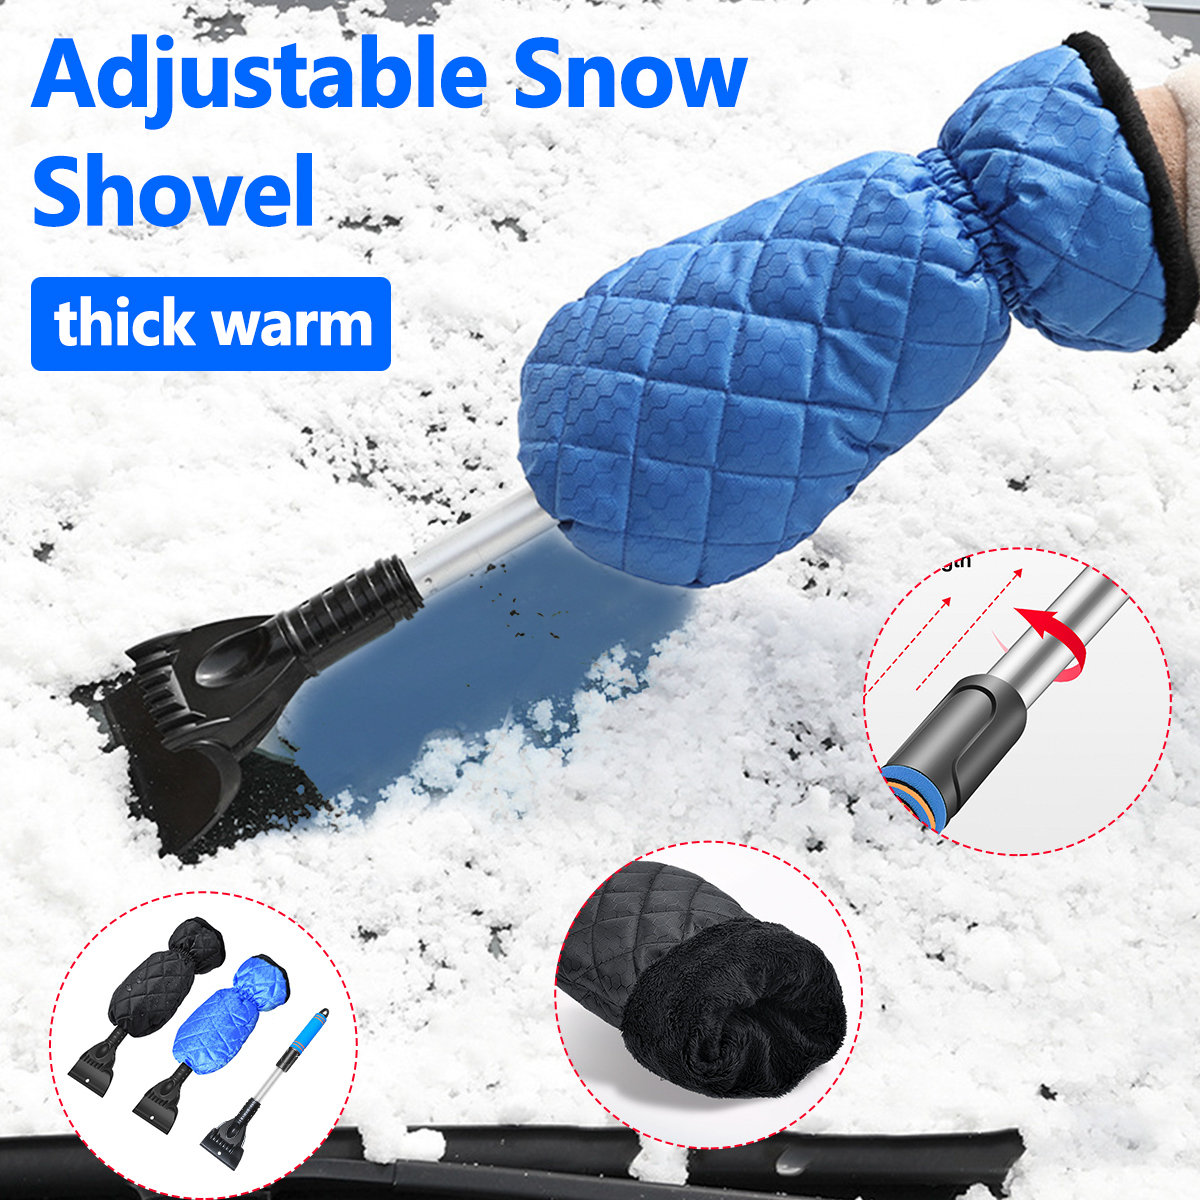 56CM-Telescopic-Rotating-Snow-Shovel-With-Gloves-Vehicle-Winter-Shoveling-Snow-Tools-1786471-2